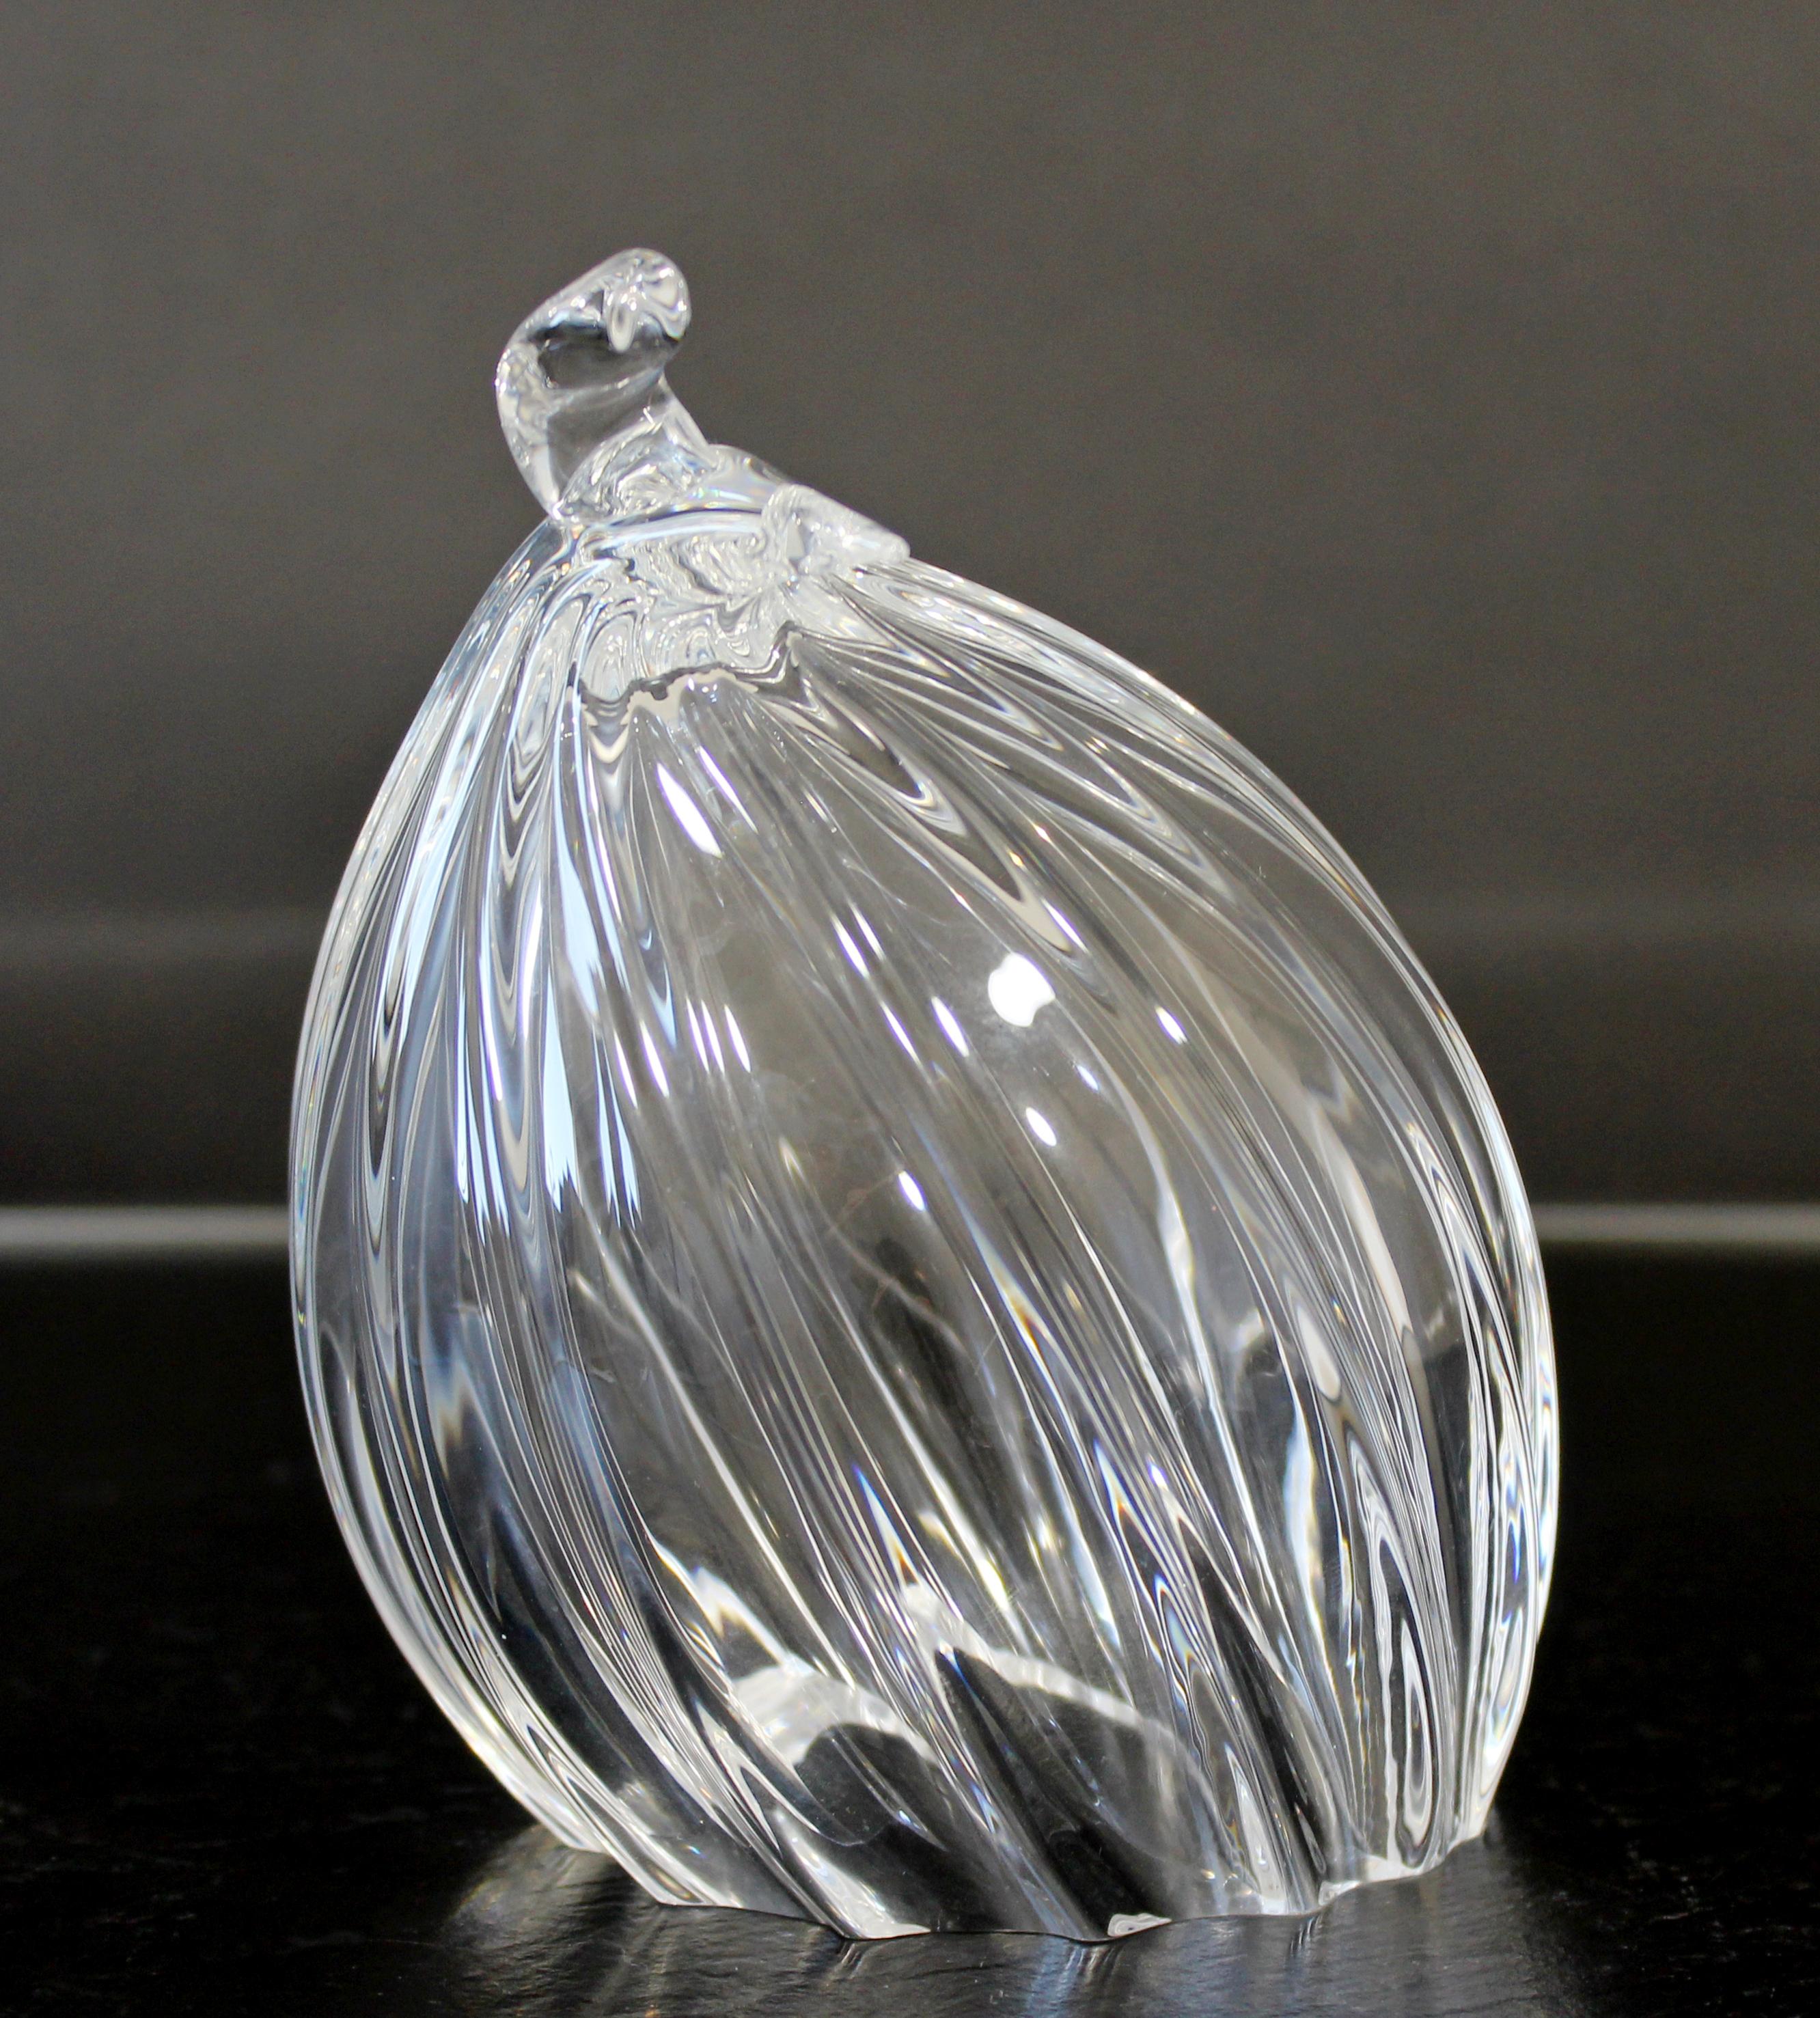 For your consideration is a quaint, Steuben signed, ribbed quail, glass statuette sculpture. In excellent condition. The dimensions are 4